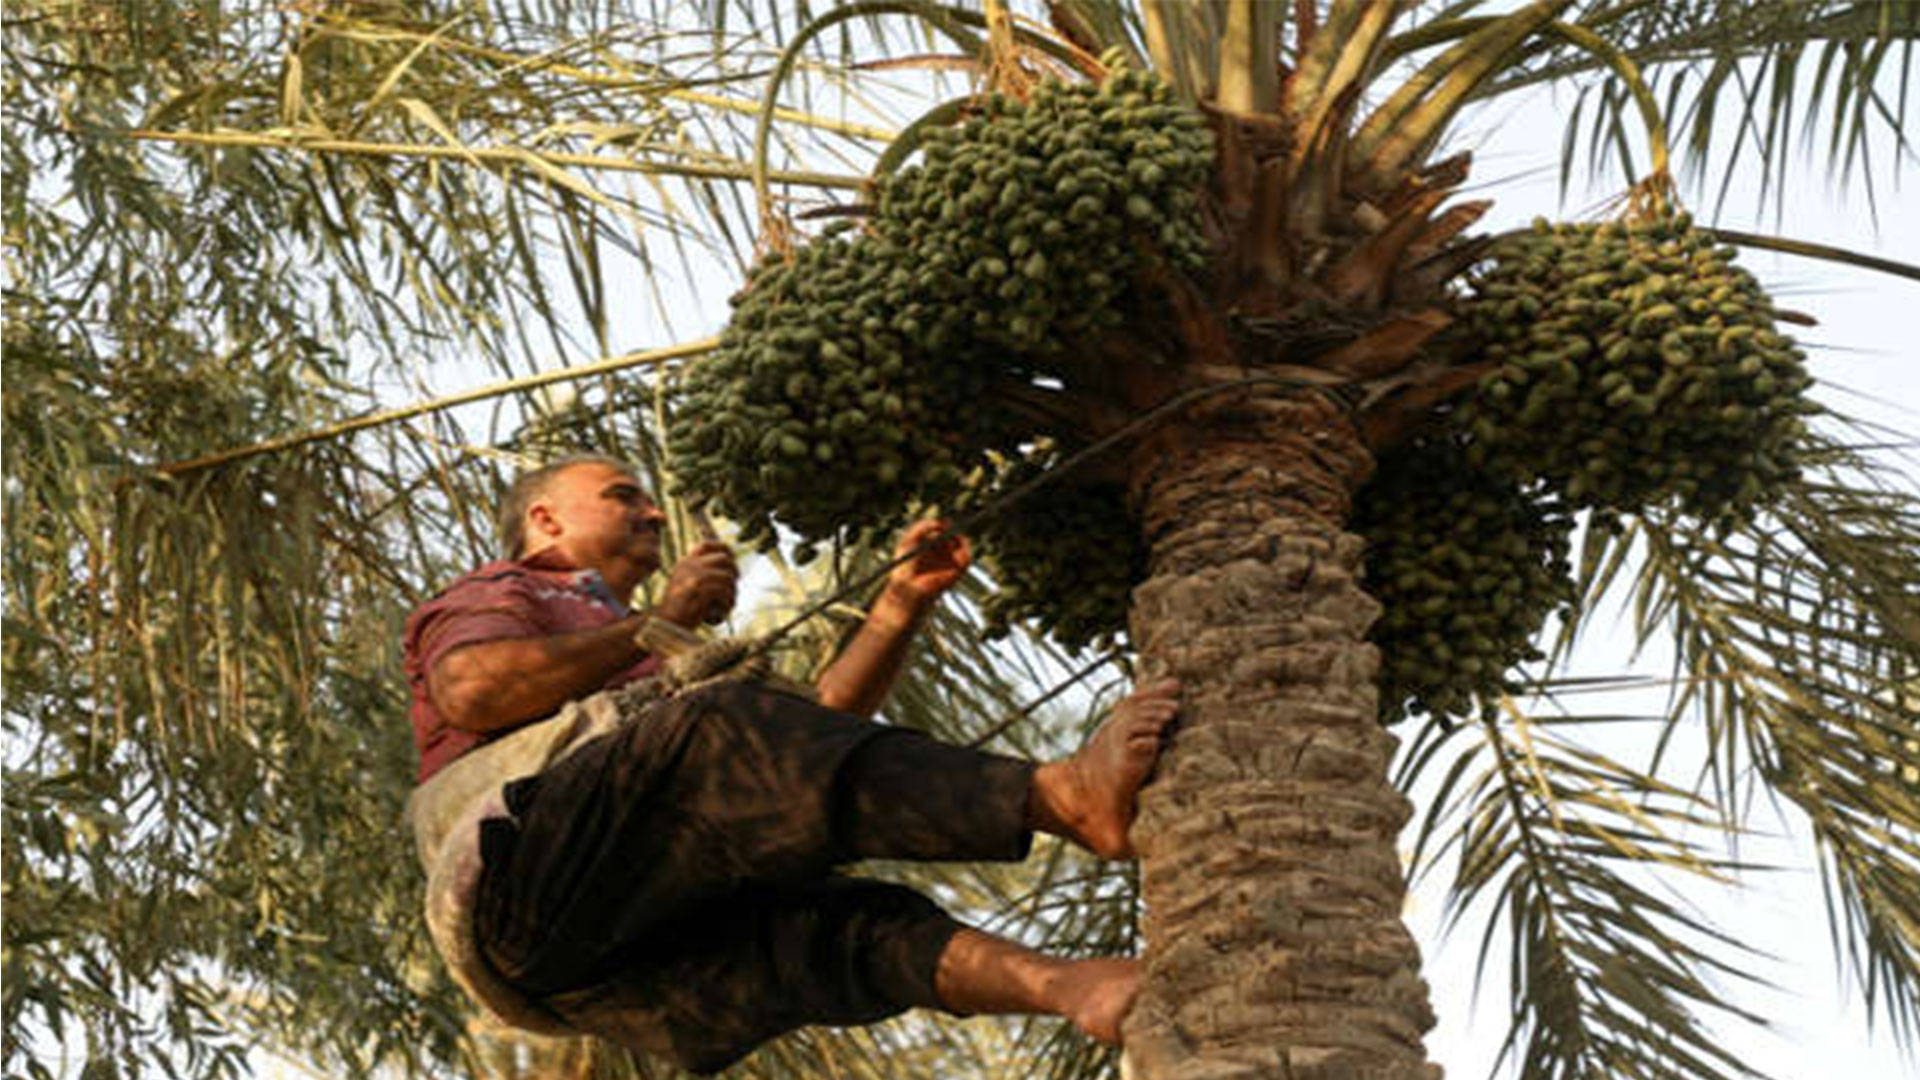  According to official figures, Iraq exported almost 600,000 tonnes of dates in 2021, with the World Bank saying the fruit is the country's second largest export commodity after oil. (AFP)